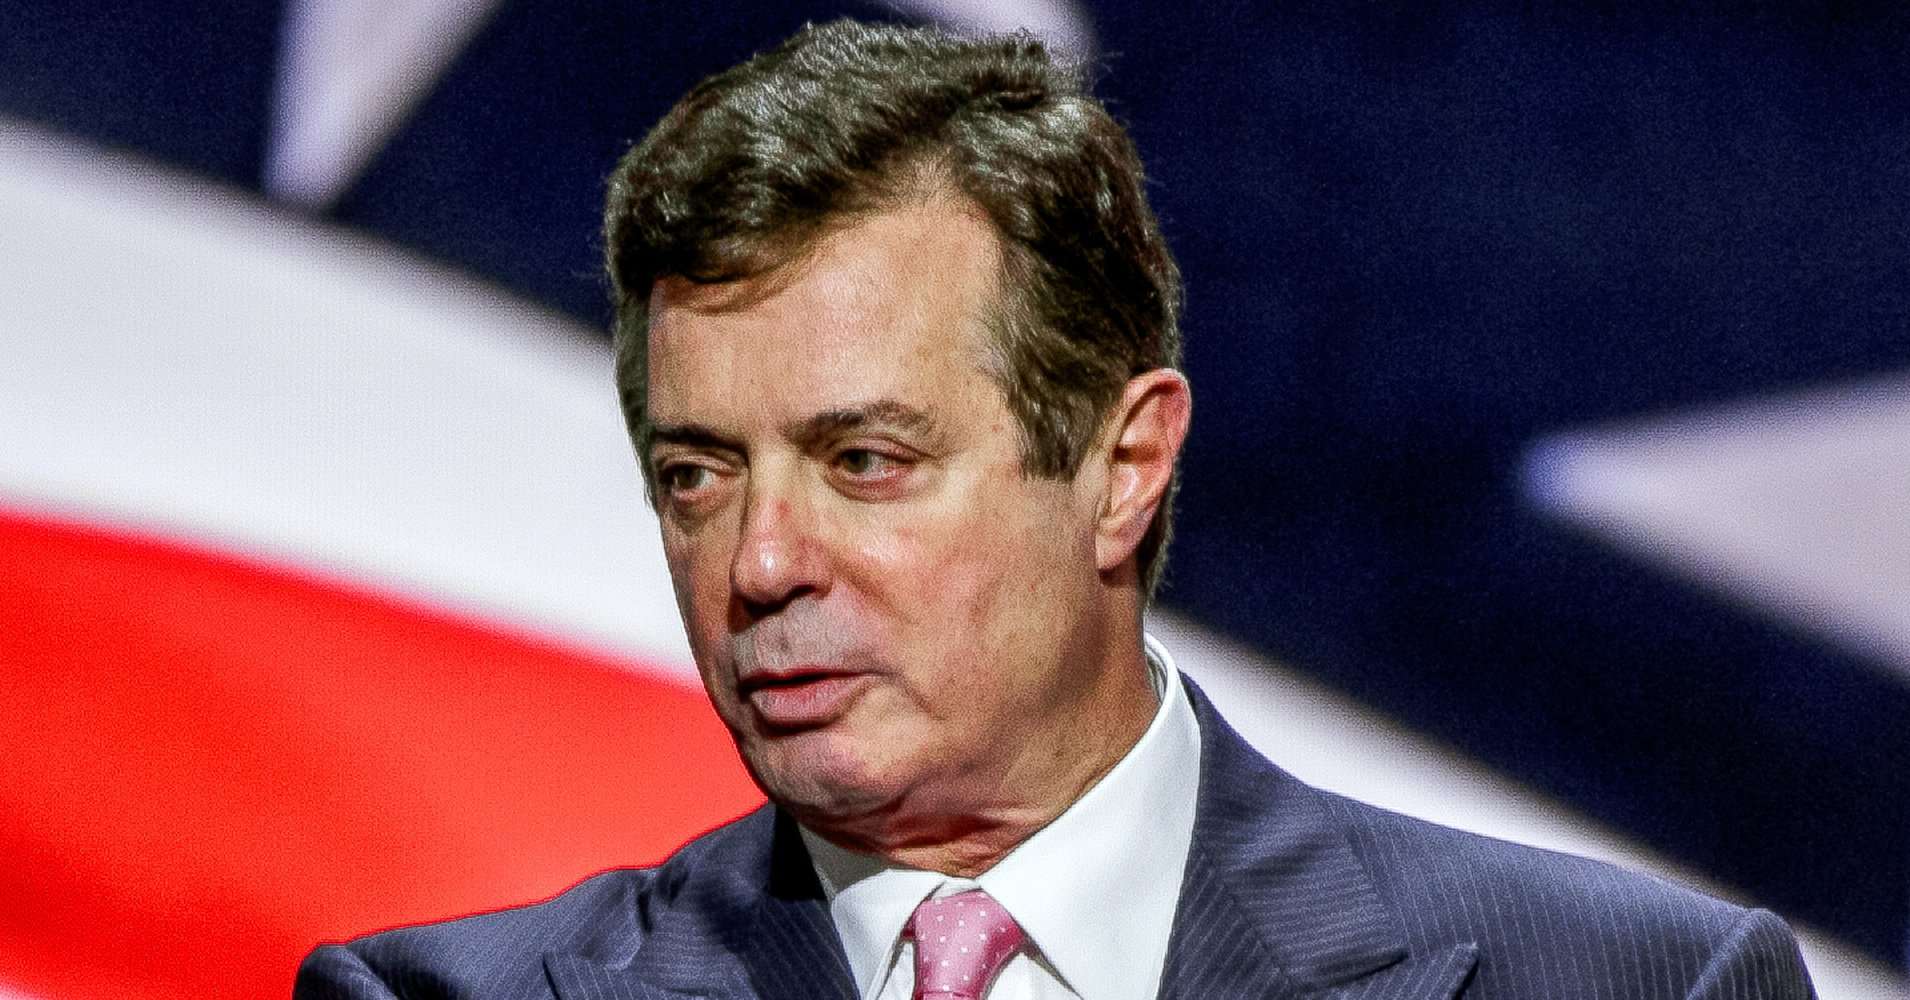 image for She Got 5 Years For Voting Illegally Once. Paul Manafort Got Less Time For Years Of Cons.